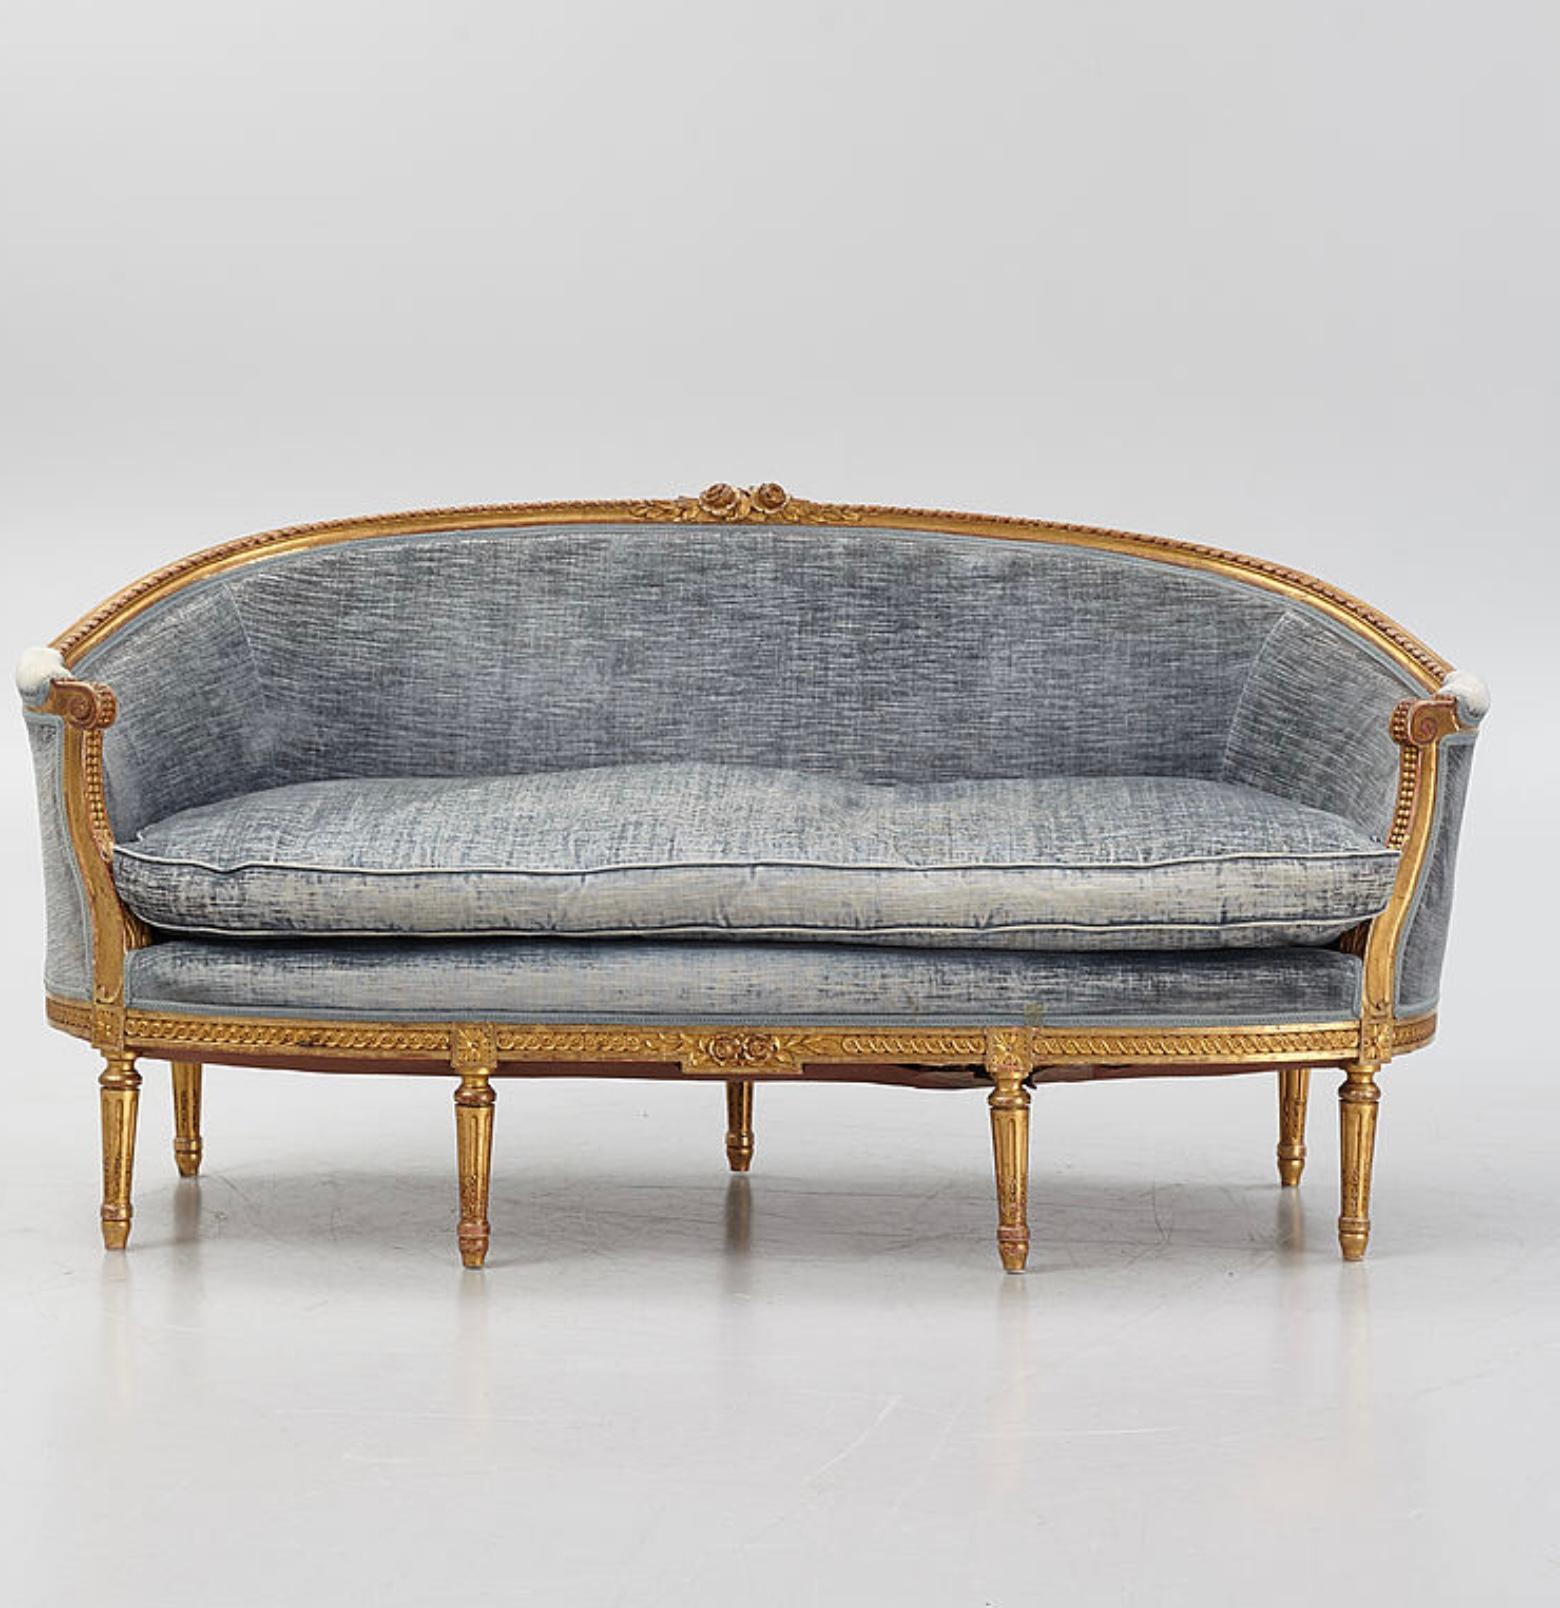 1900s Swedish Two-Seater Gustavian Style Gilt Velvet Sofa with Carved Decoration 4